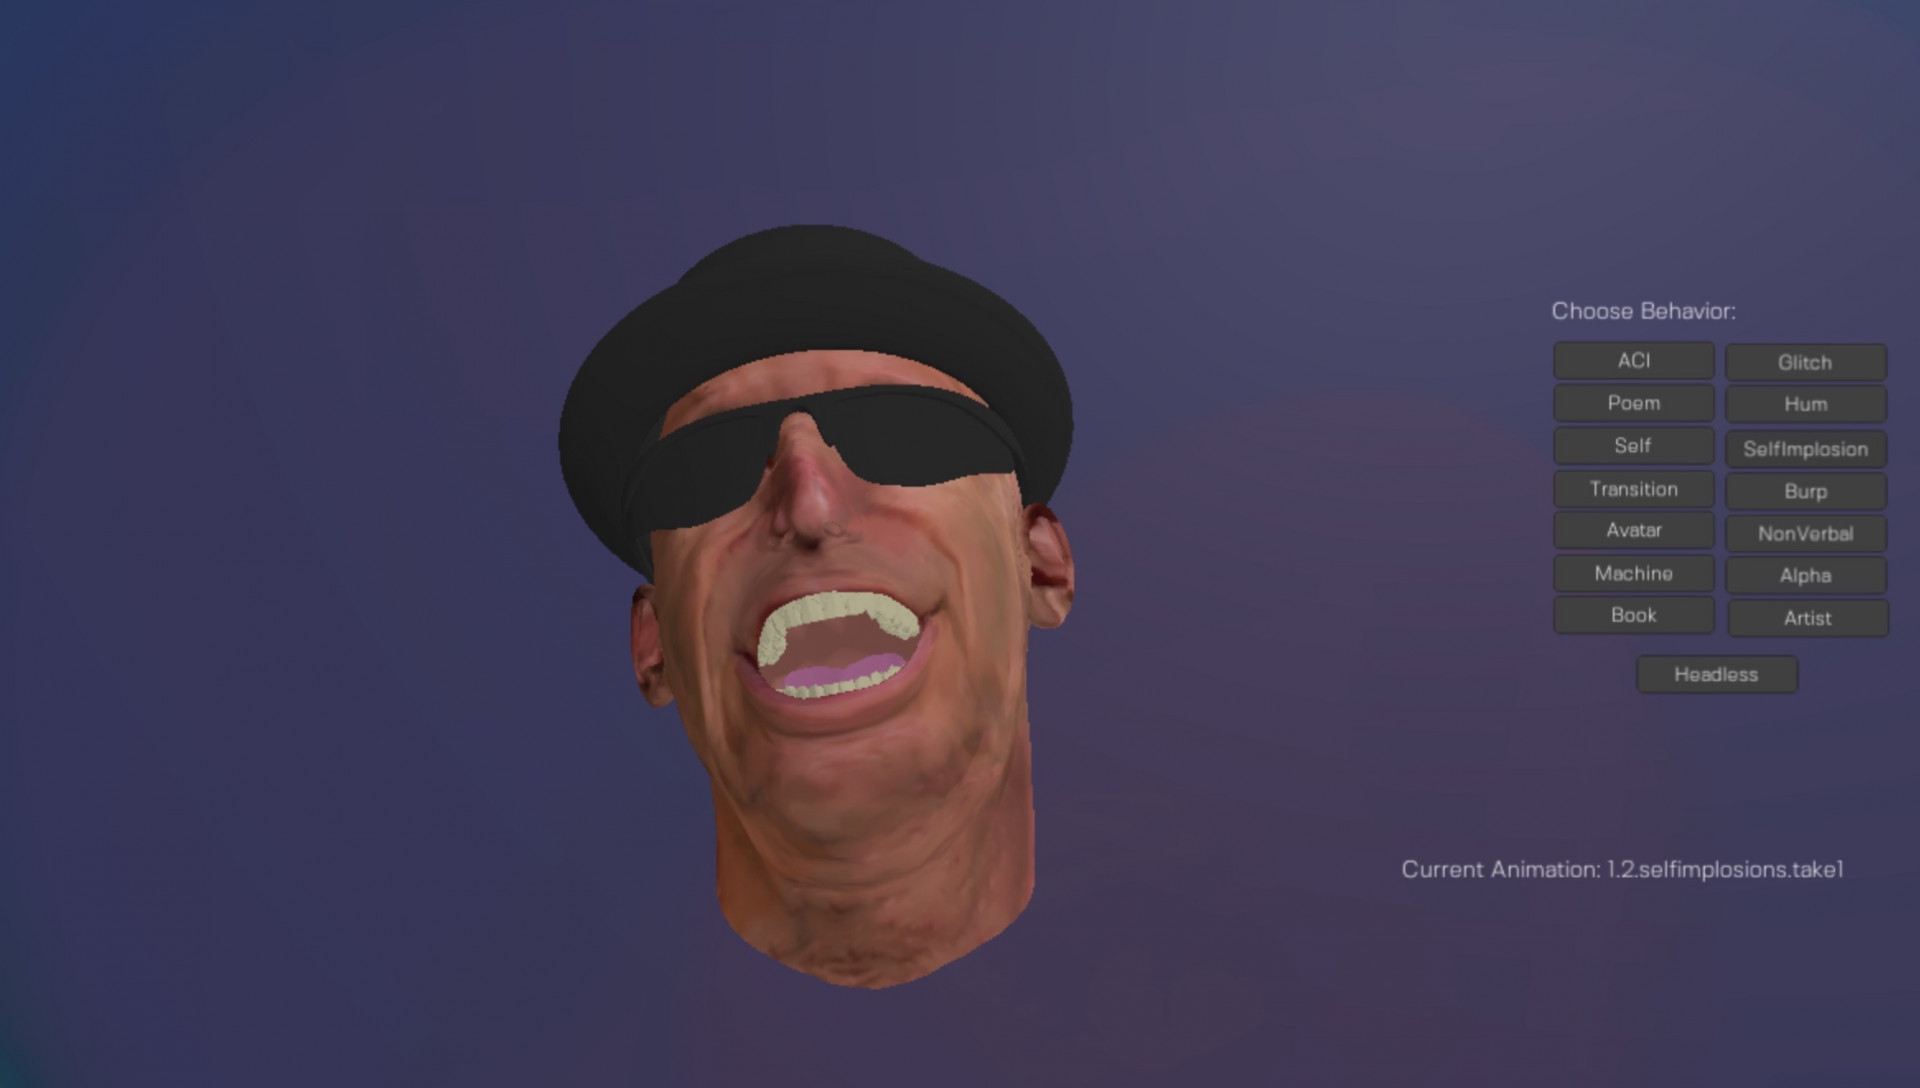 A floating, 3-D modeled male head with dark sunglasses and a bowler cap floats against a purple background. To the head's right is a list of behaviors a user can choose from, ranging from "Hum" to "Burp"